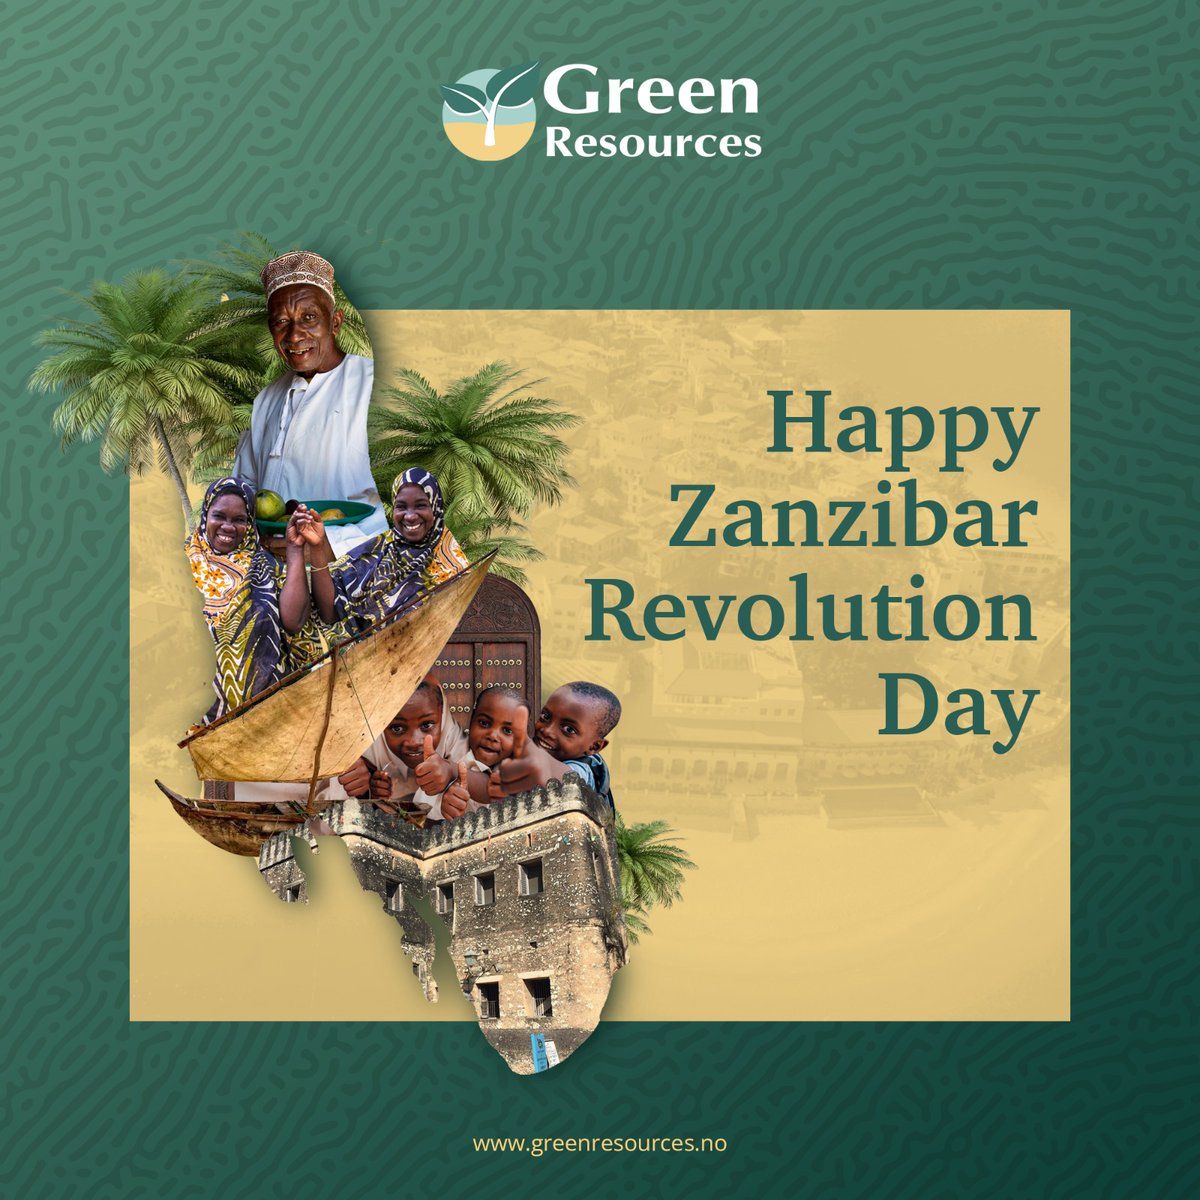 Happy Zanzibar Revolution Day! 🌿✨ Here's to cultivating growth, fostering unity, and embracing a flourishing future together. #ZanzibarRevolutionDay